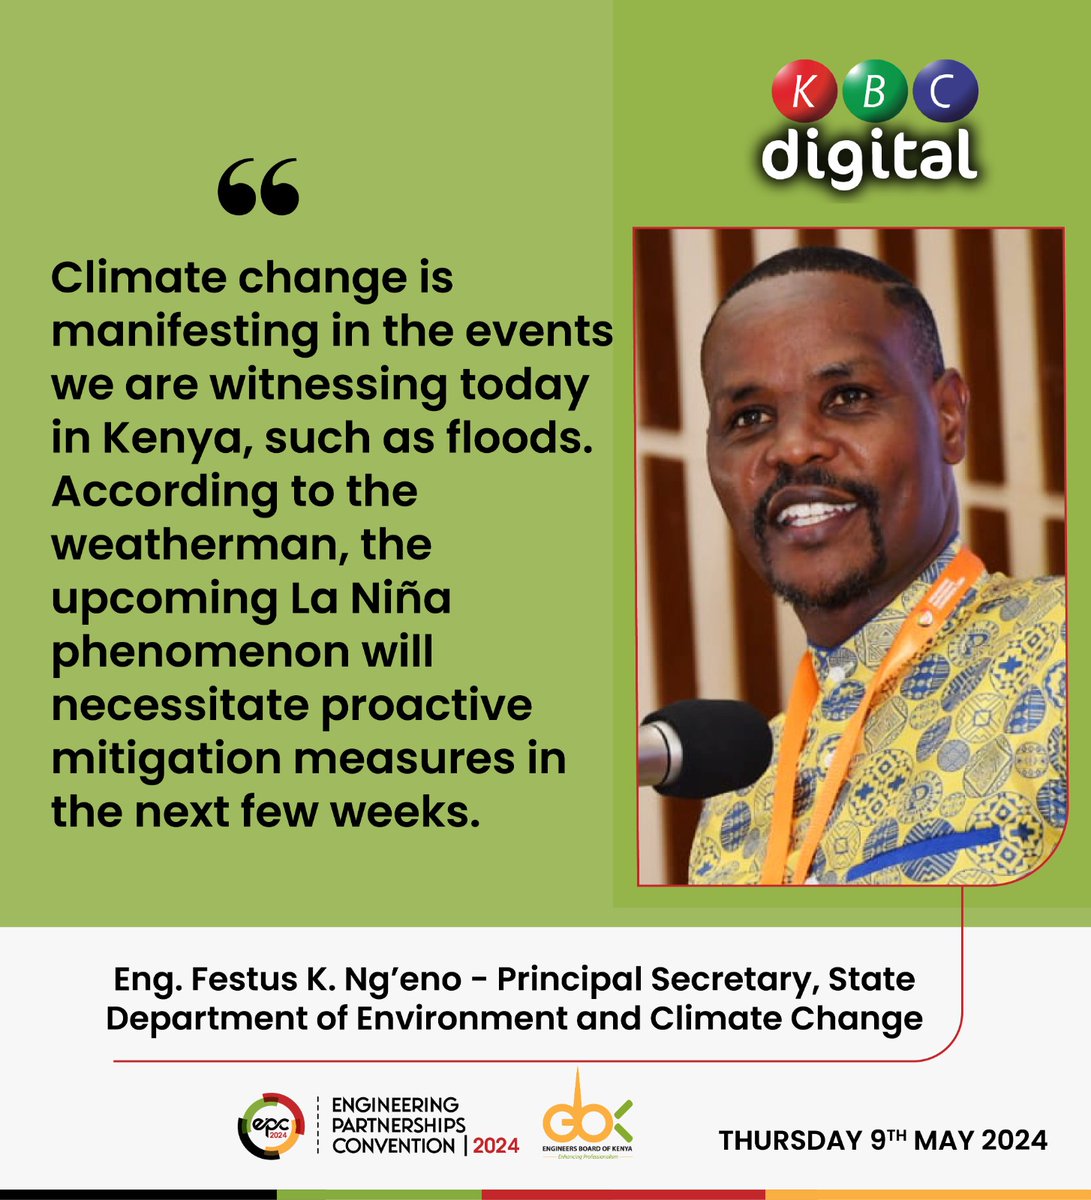 Eng. Festus Ng’eno, the Principal Secretary, addressed the impacts of climate change evident in current events in Kenya, such as floods. ^PMN #EPC2024 #EngineeringAt60 @EngineersBoard